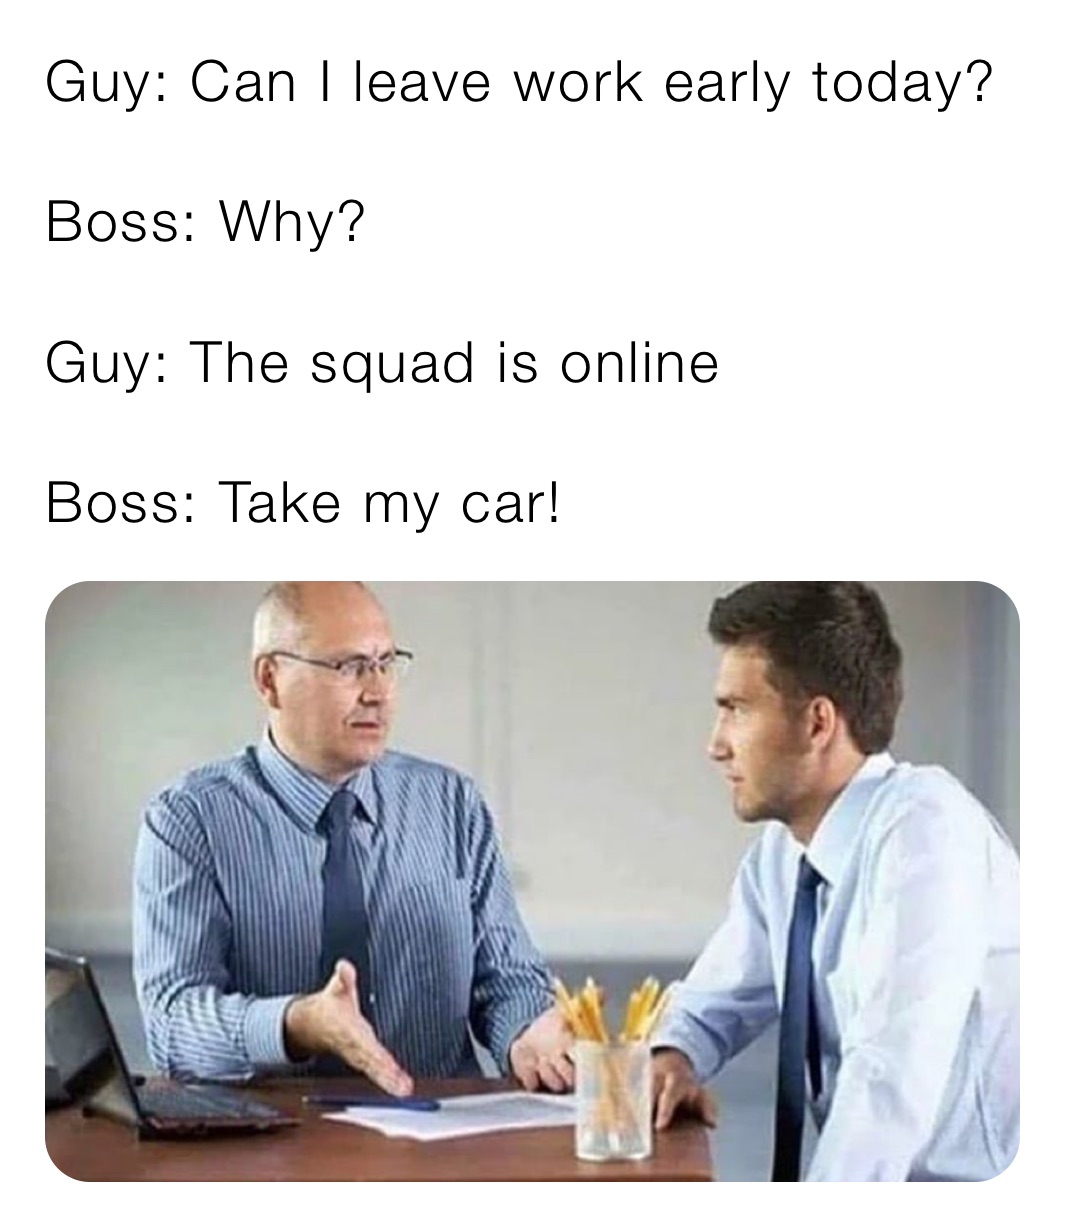 Guy: Can I leave work early today?

Boss: Why?

Guy: The squad is online 

Boss: Take my car!